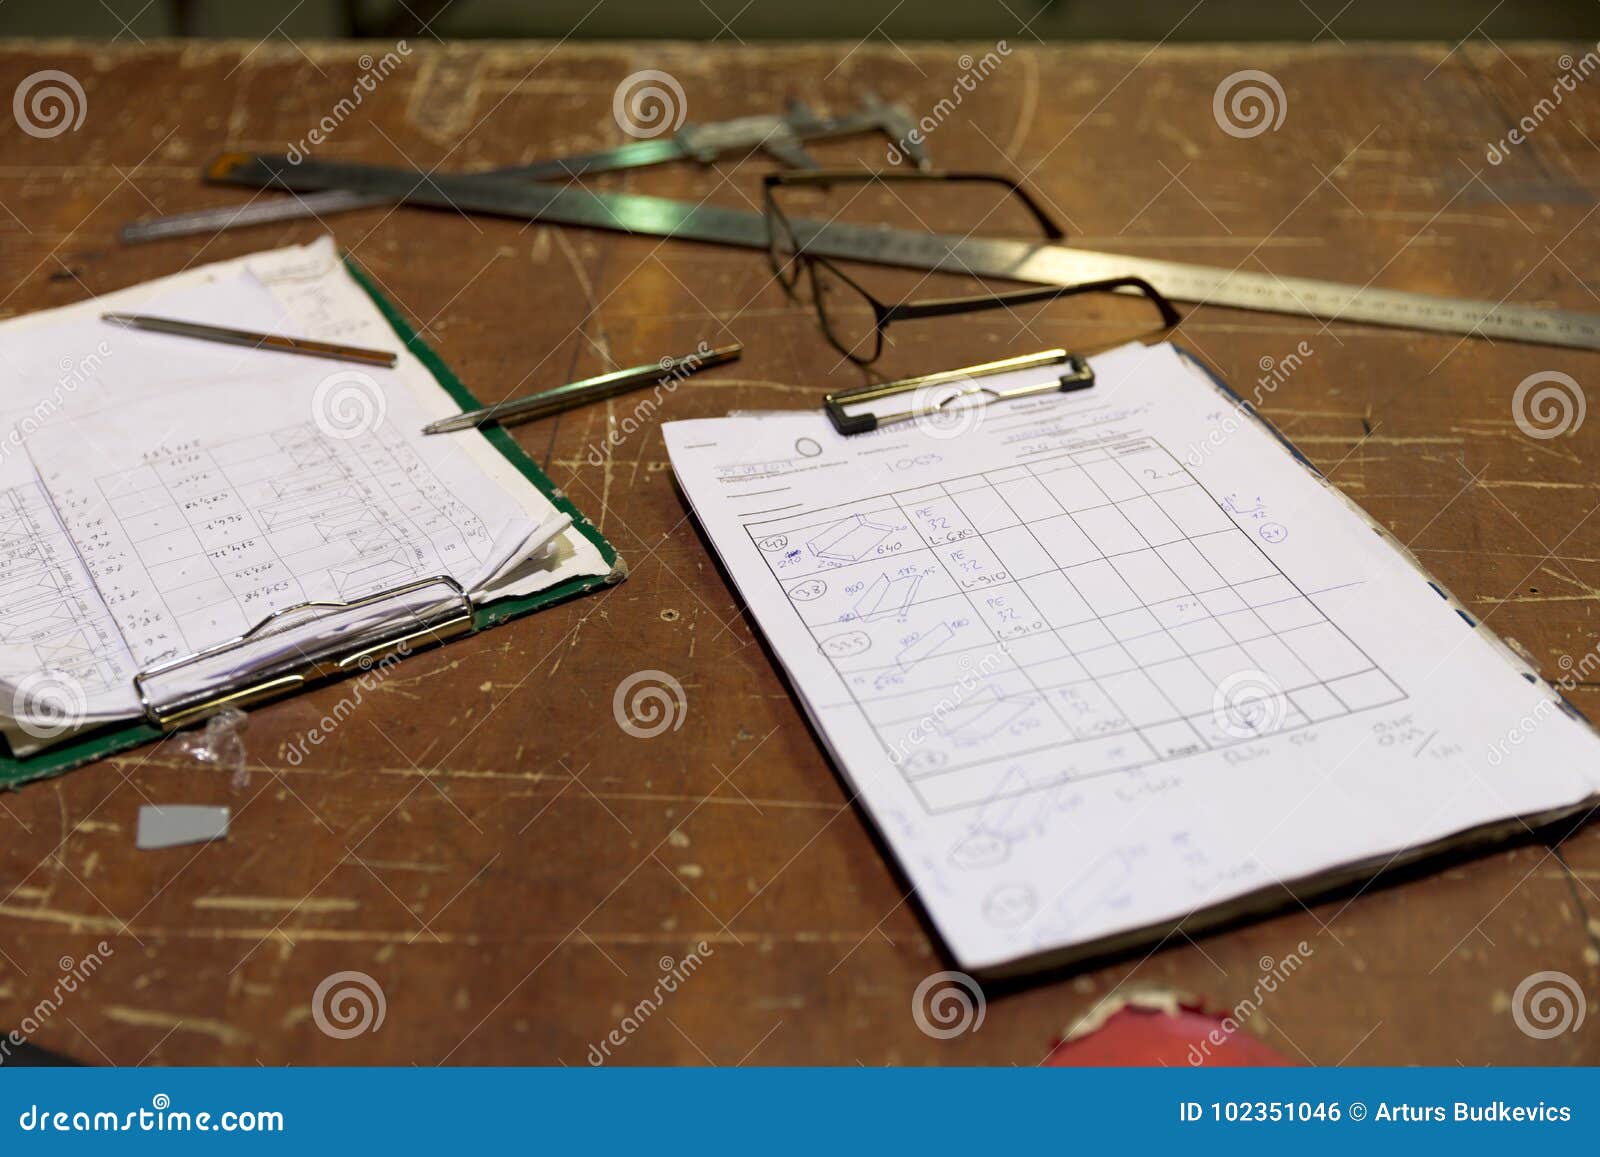 clipboards with order notes on workshop table